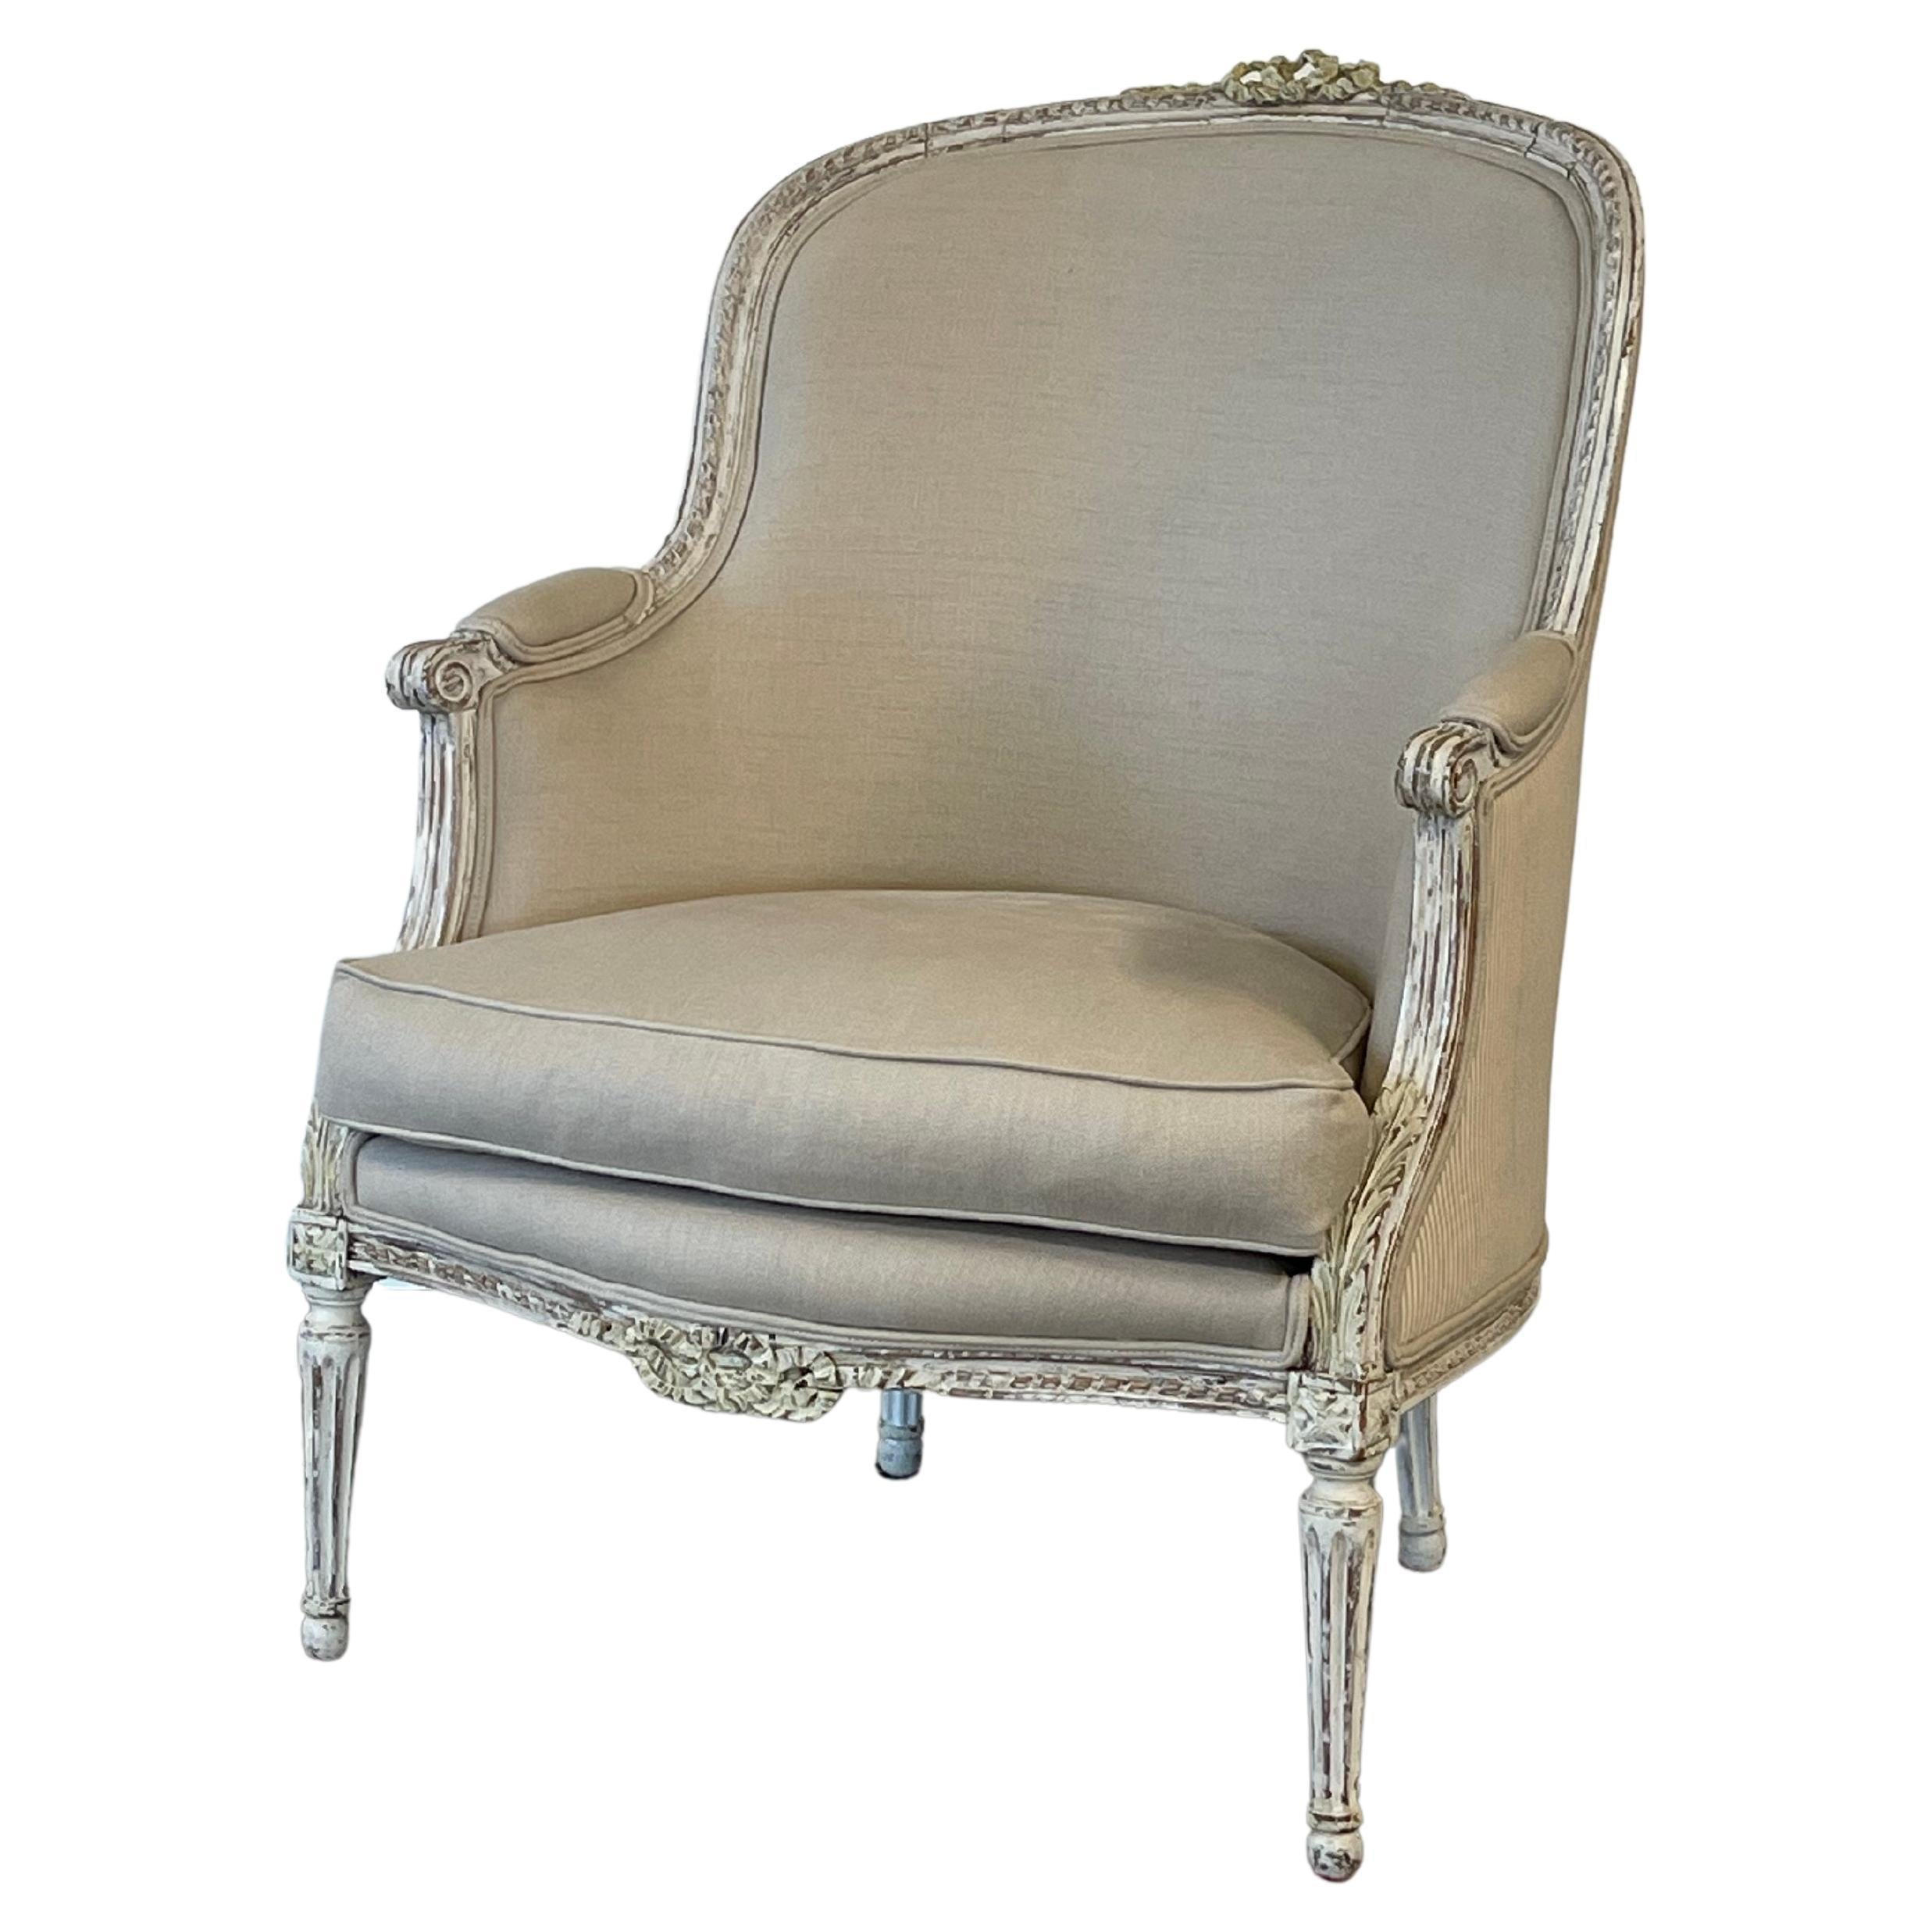 French Louis XVI Style Upholstered Bergère Chair, 19th Century For Sale